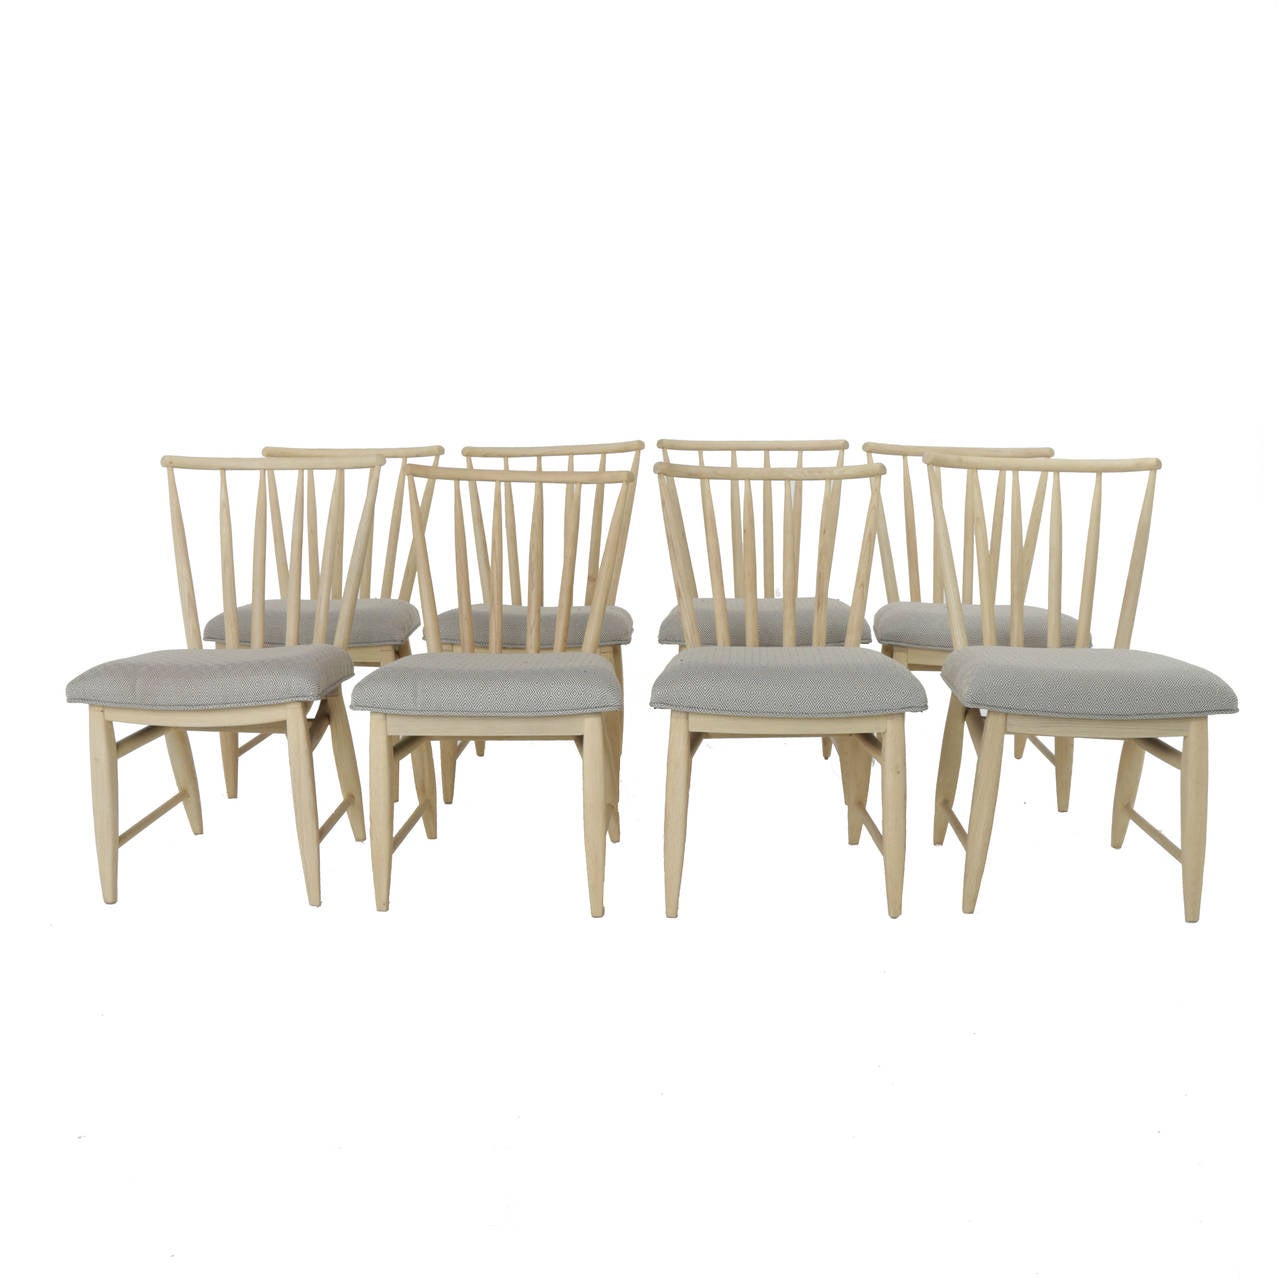 A lovely set of eight spindle back dining chairs in bleached wood with oil finish and upholstered in a patterned gray and cream fabric. 

In order to preserve our inventory, after restoration we blanket wrap and store nearly every piece in our